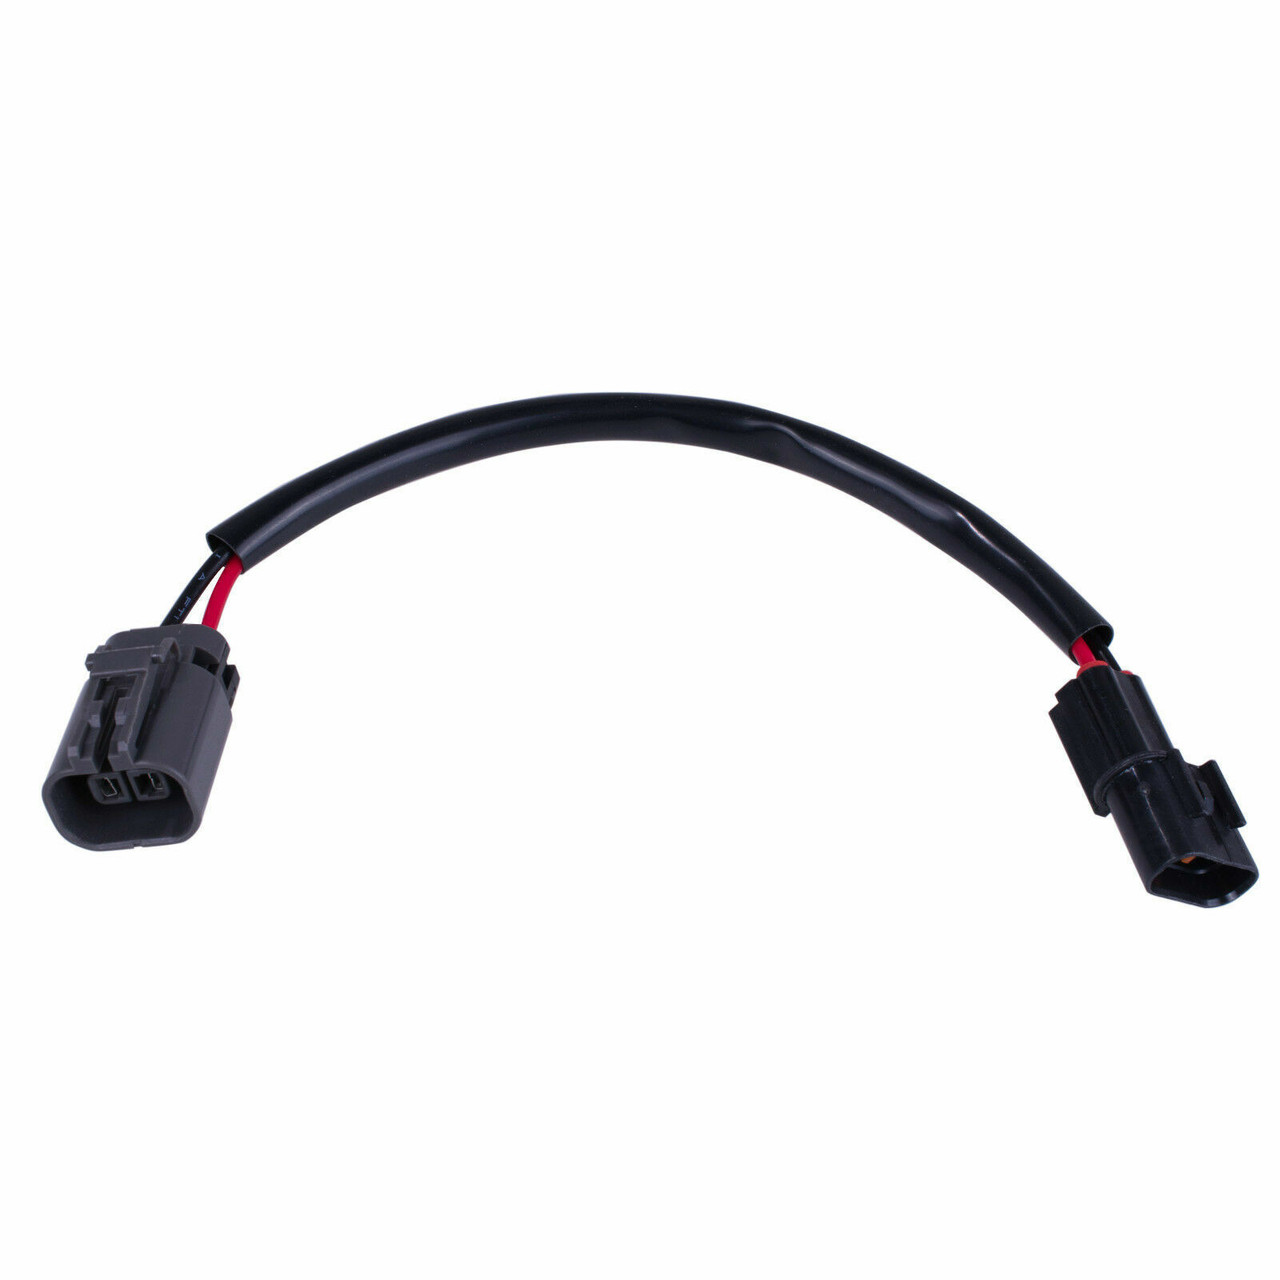 Engine Cooling Fan Wiring Harness Fits Mitsubishi 2008-2017 Lancer Outlander Replaces 1355A098, 1355A245